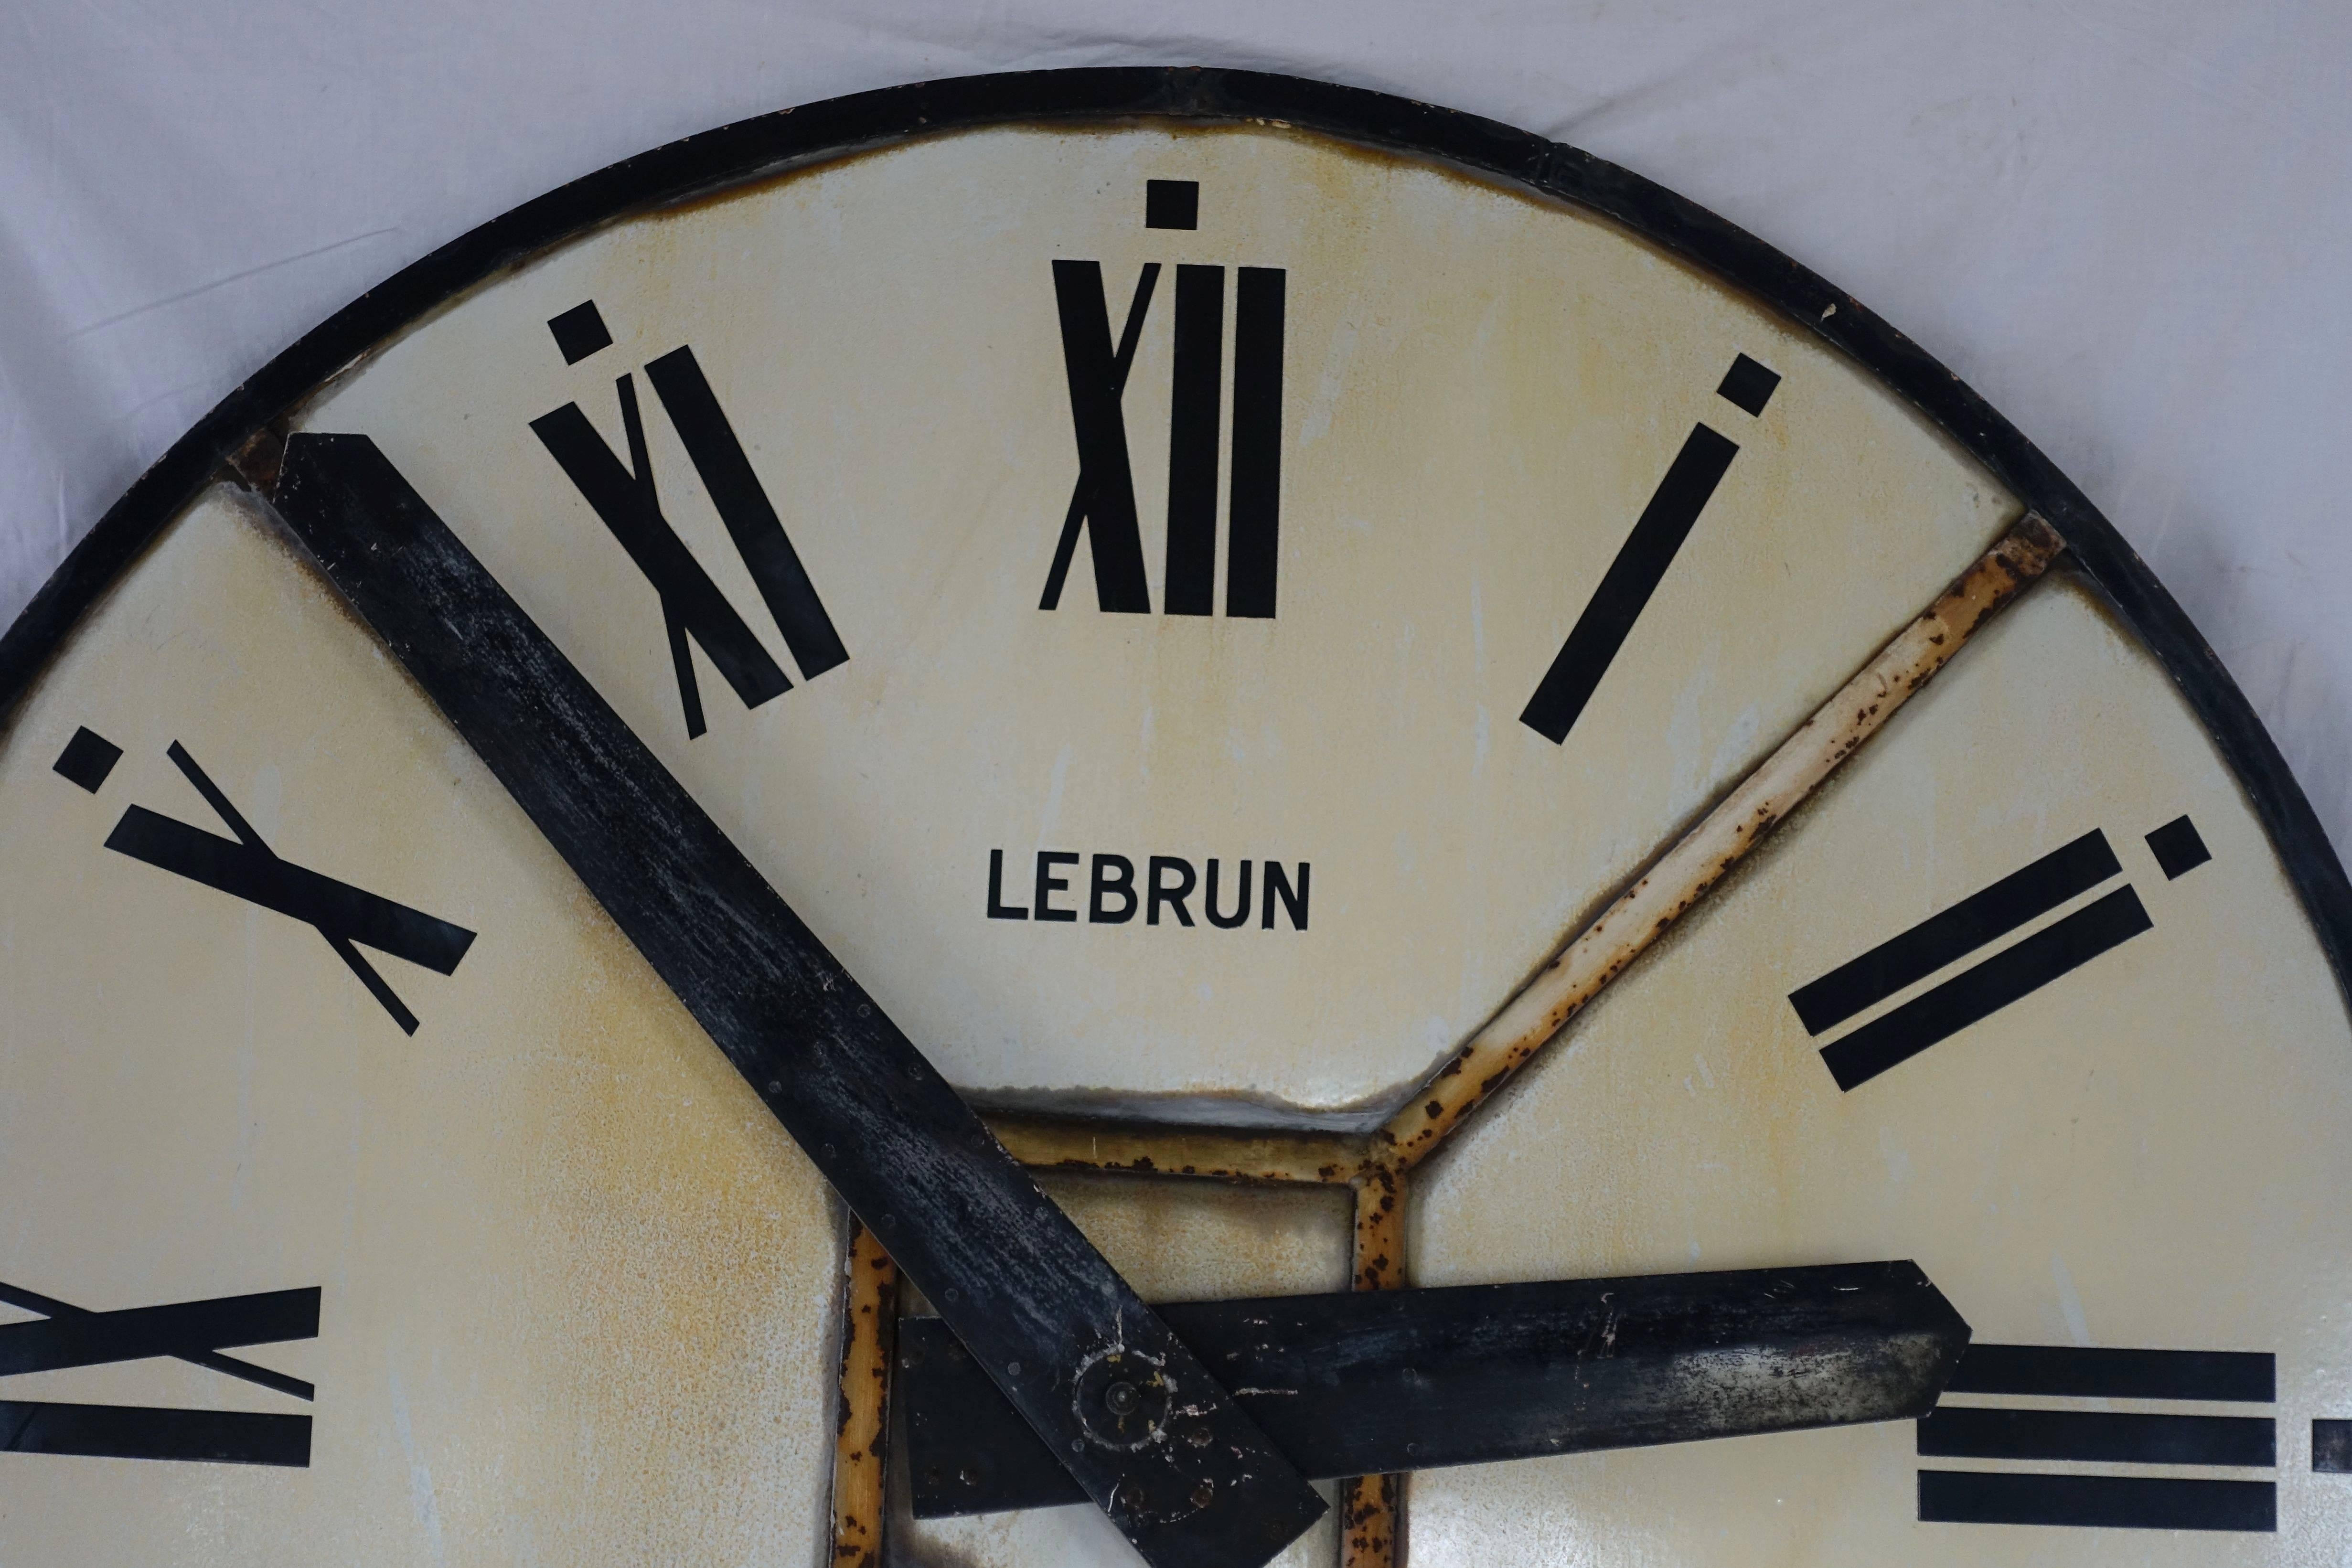 Extra large French clock face with Roman numerals.
The clock is inscribed Lebrun Signy.
It is a decorative, non functioning clock face.